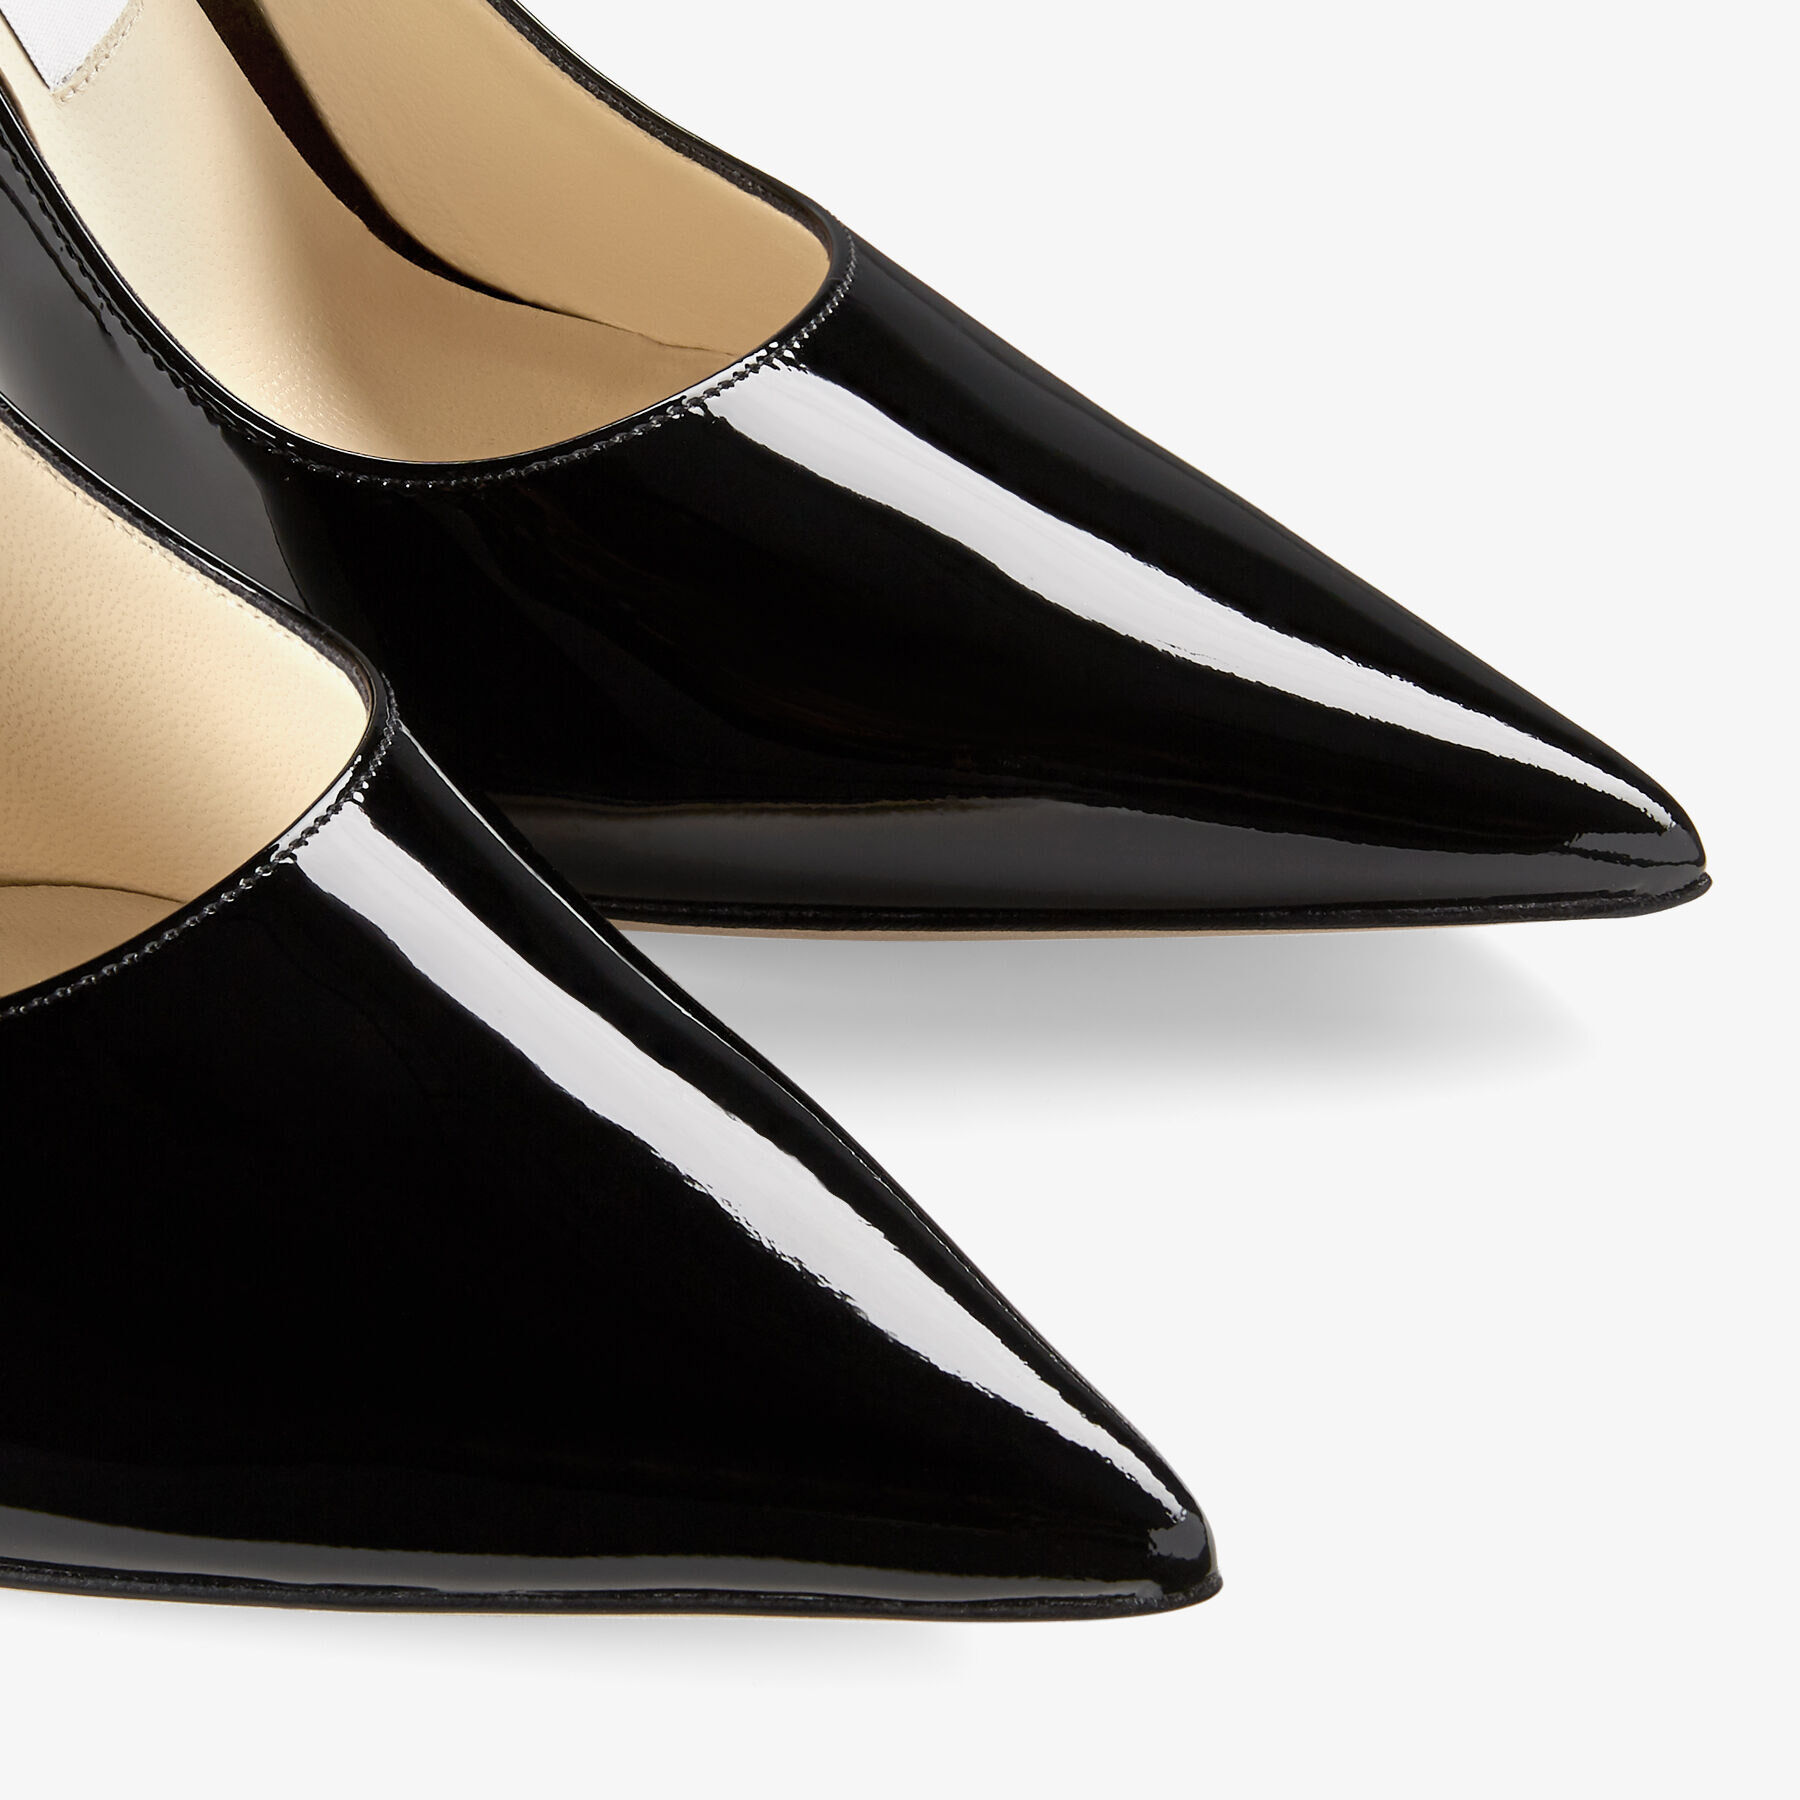 Black Patent Leather Pointed-Toe Pumps with JC Emblem | LOVE 100 